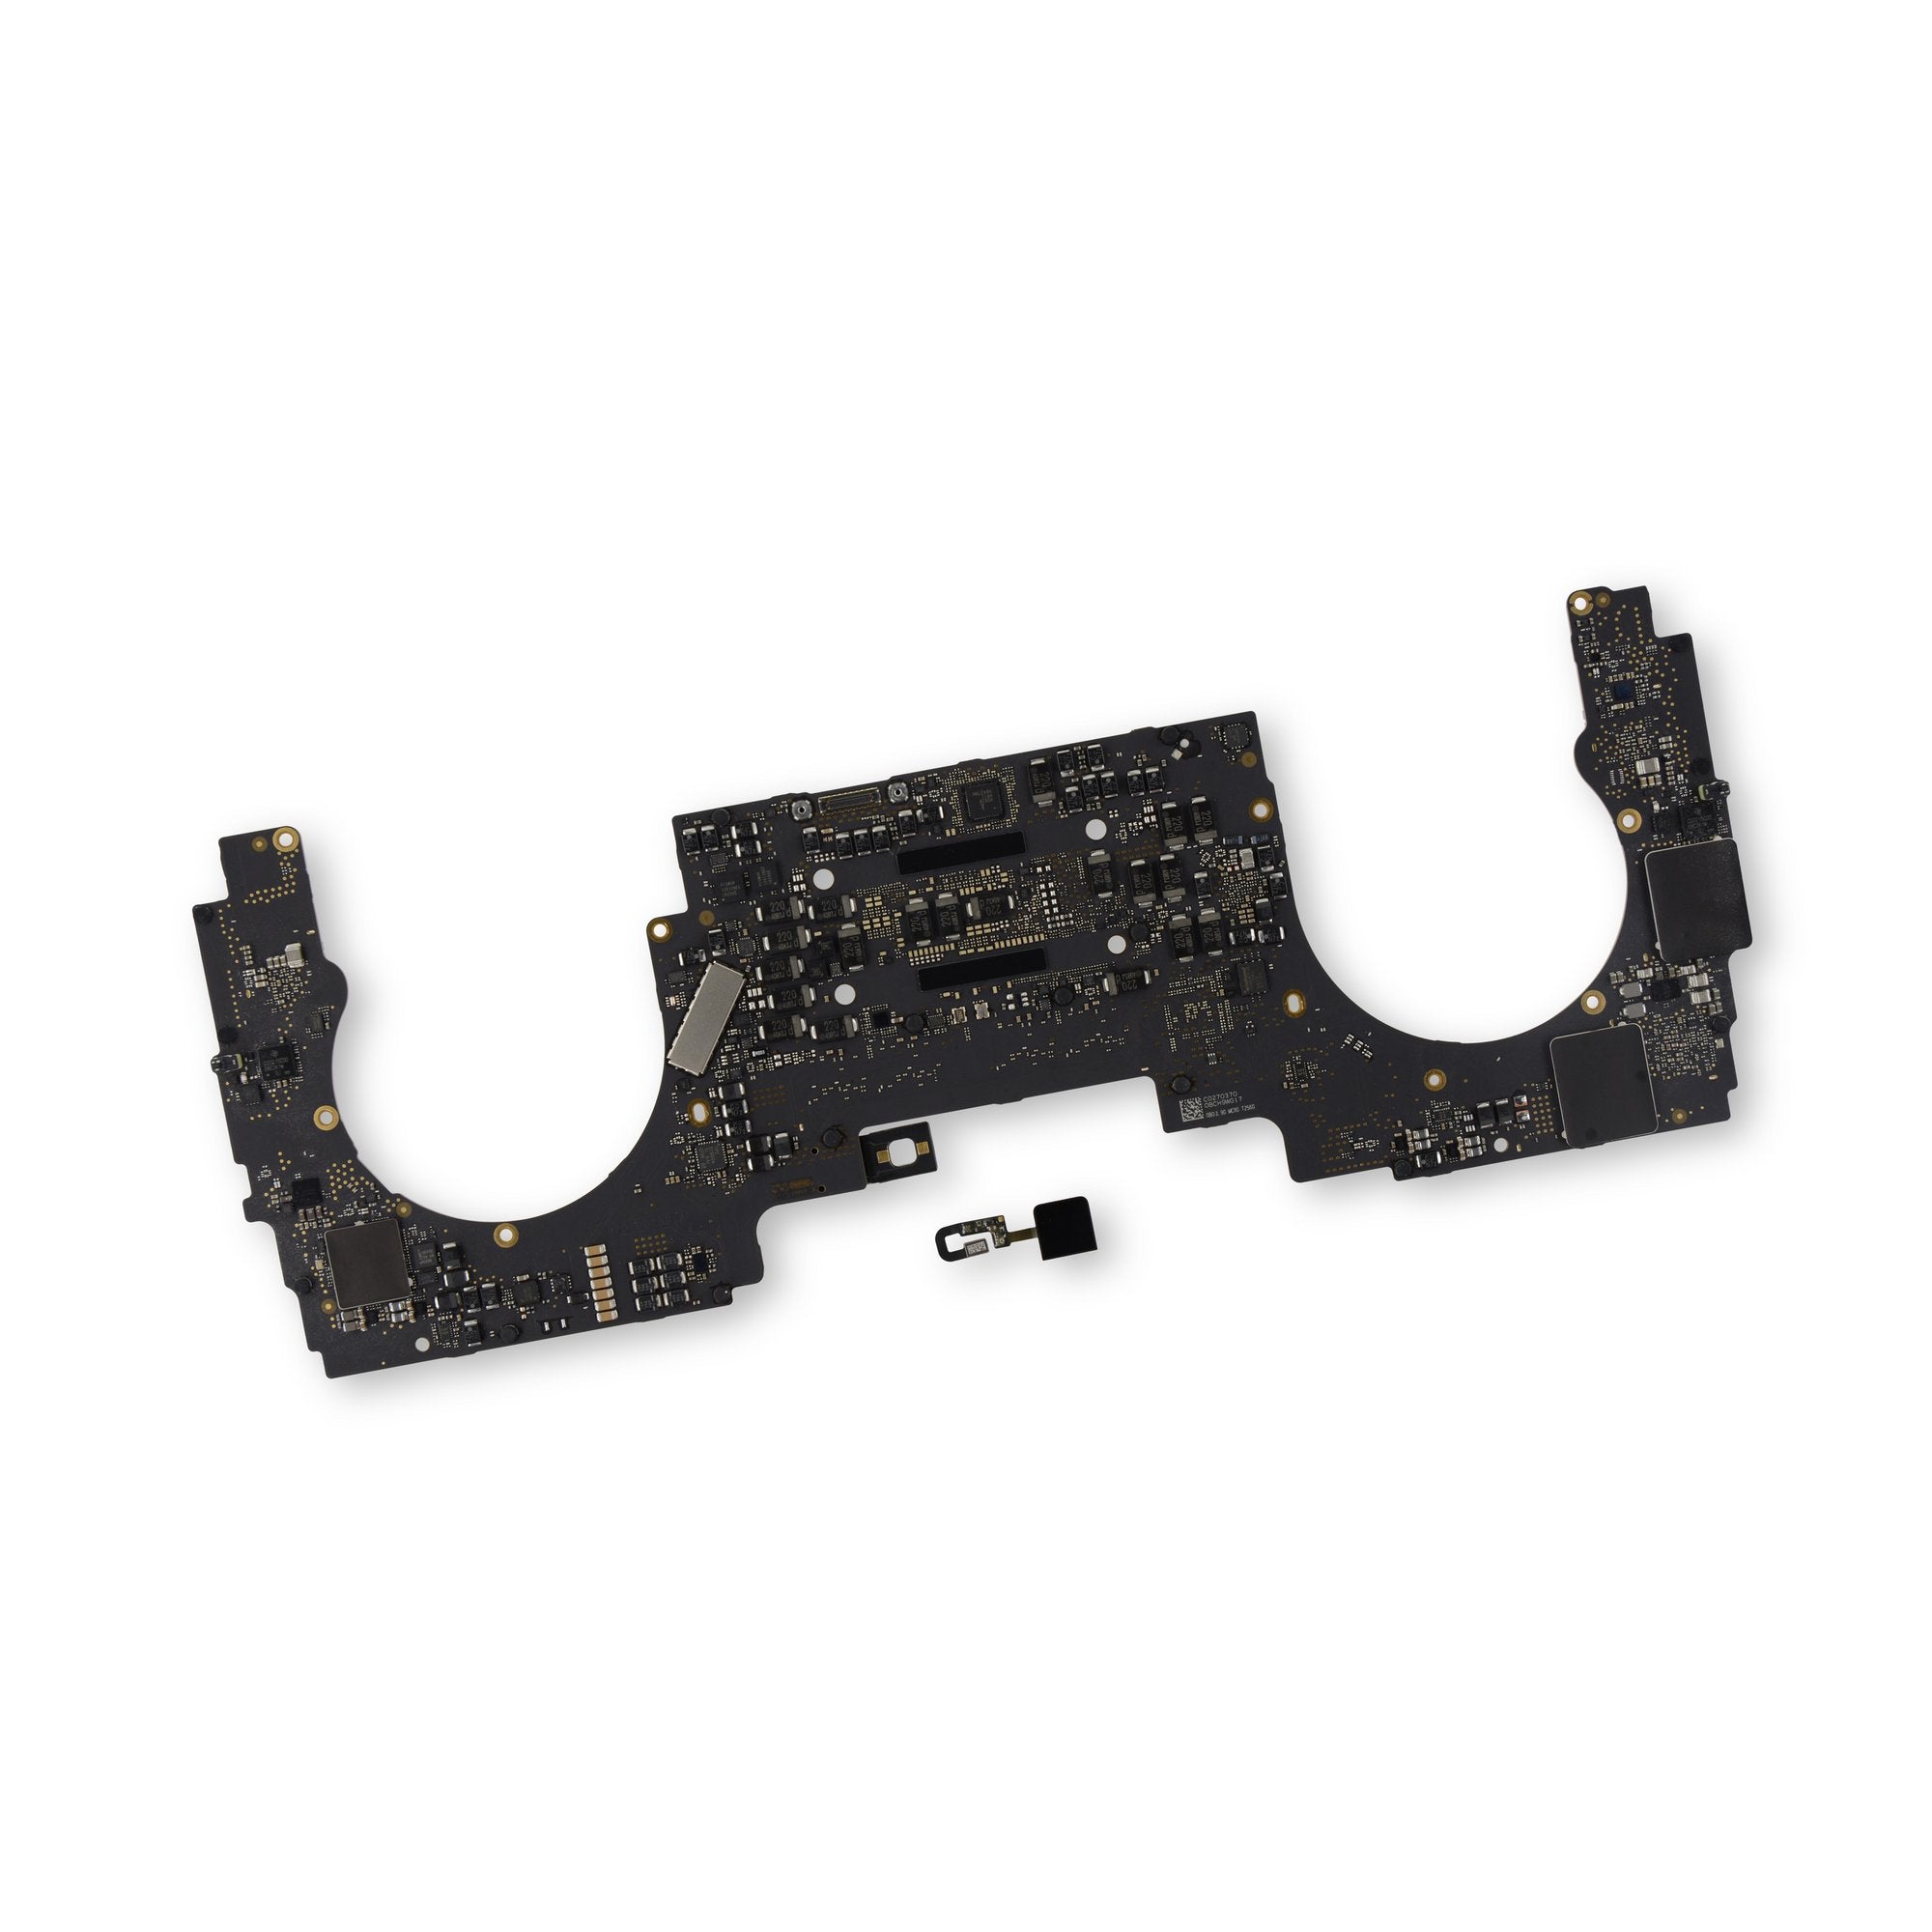 MacBook Pro 13" Retina (Touch Bar, Late 2016) 2.9 GHz Logic Board with Paired Touch ID Sensor